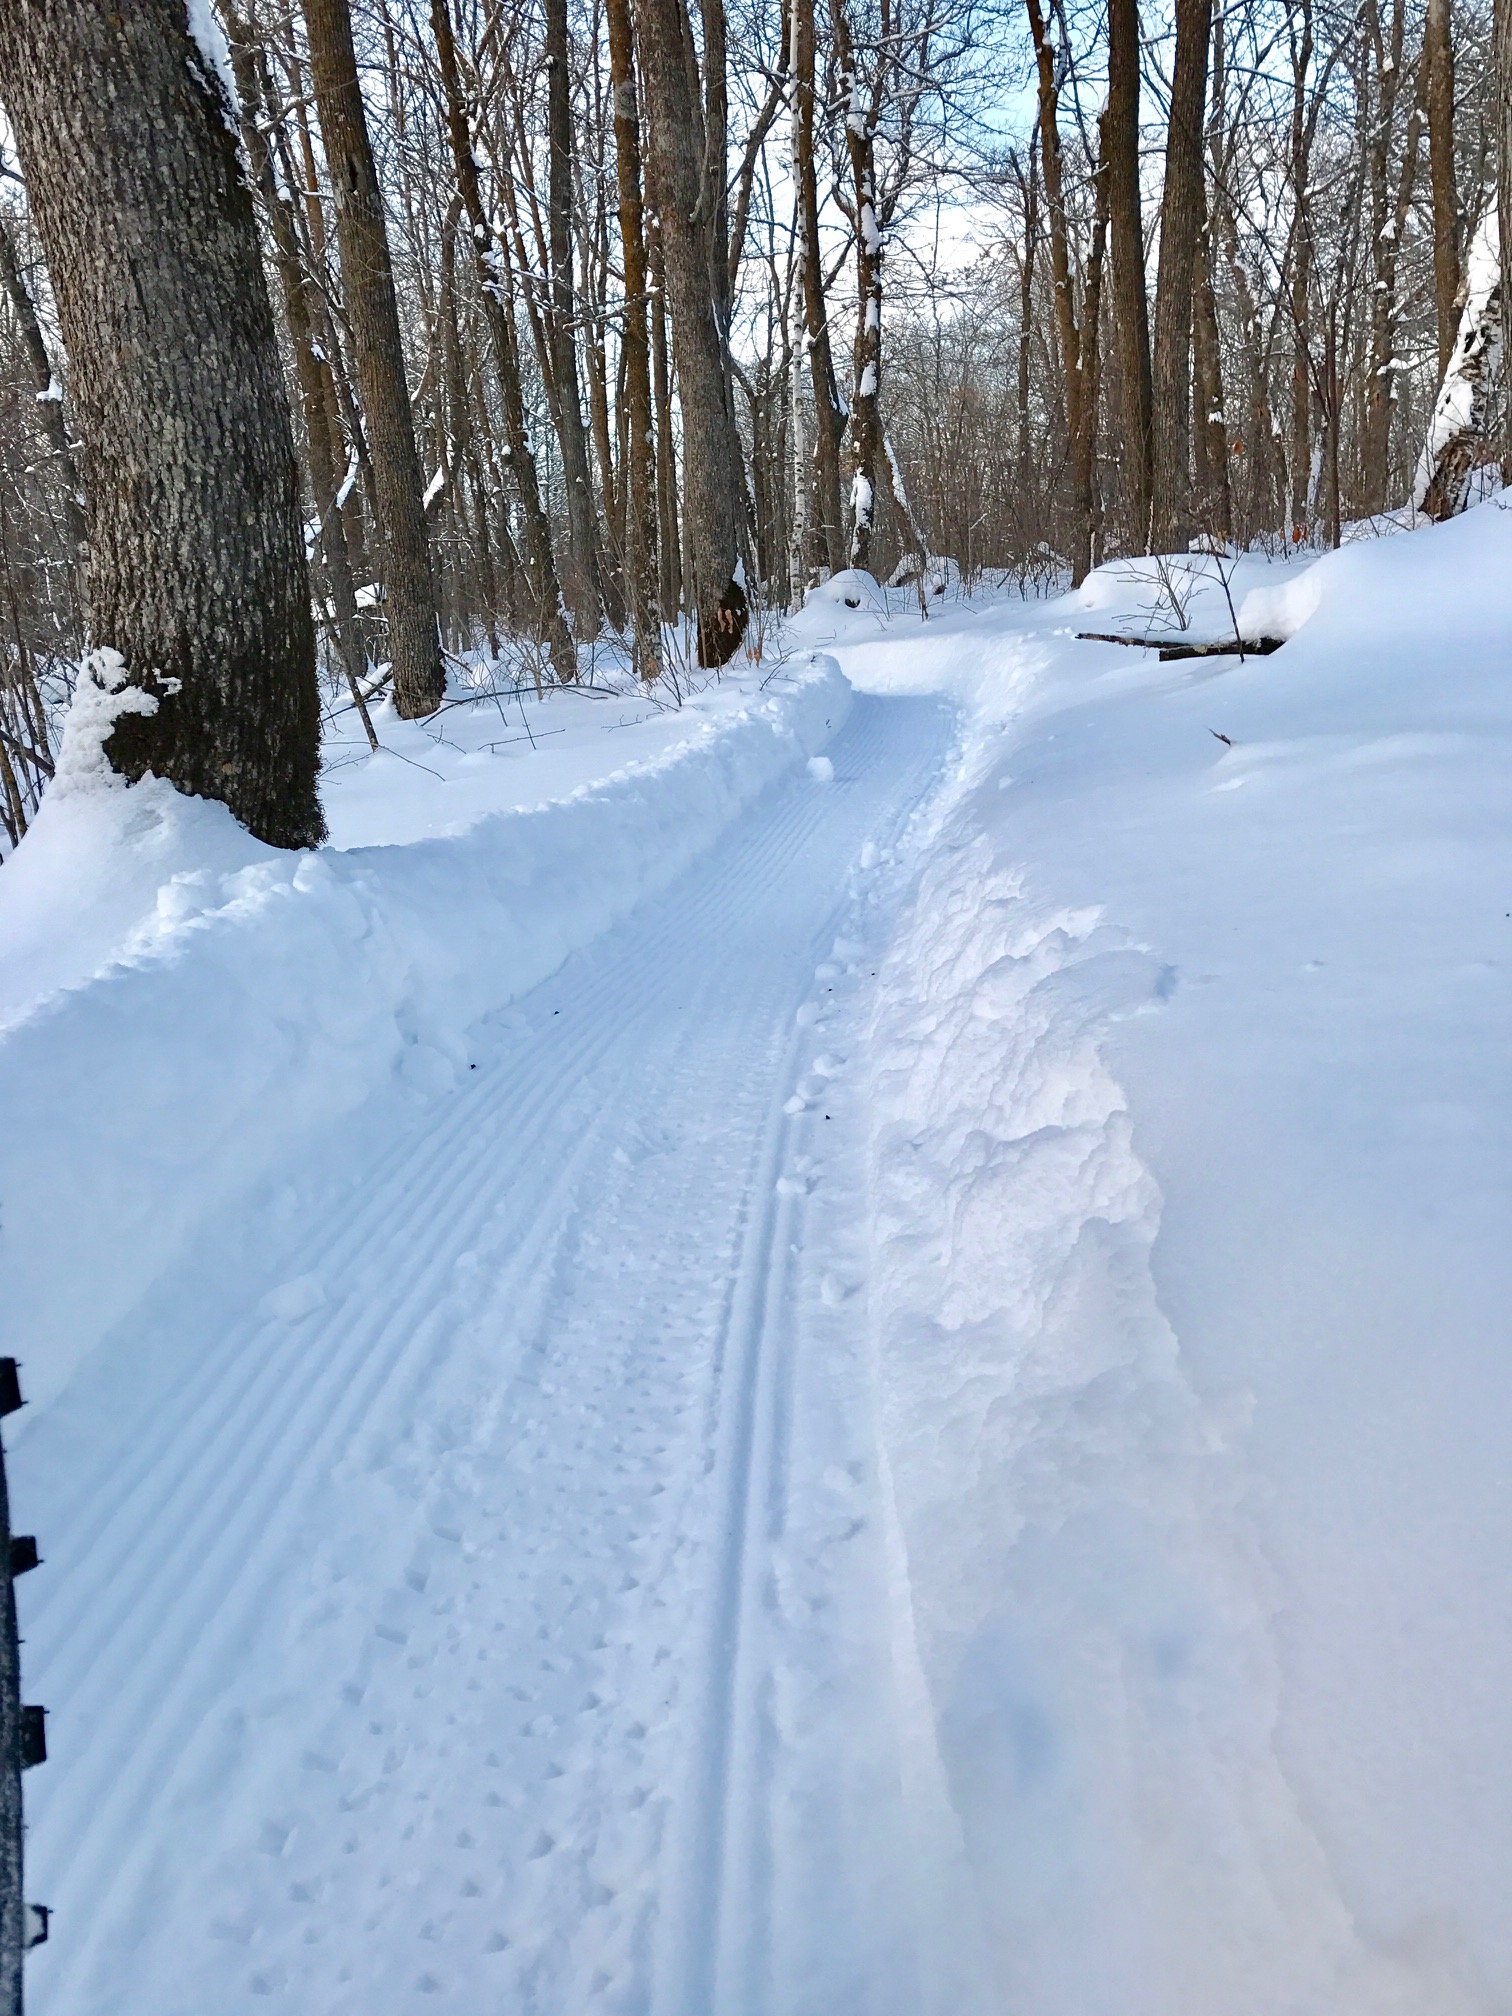 Tight and narrow makes for challenging conditions in spots but great winter riding for Fat Bikes